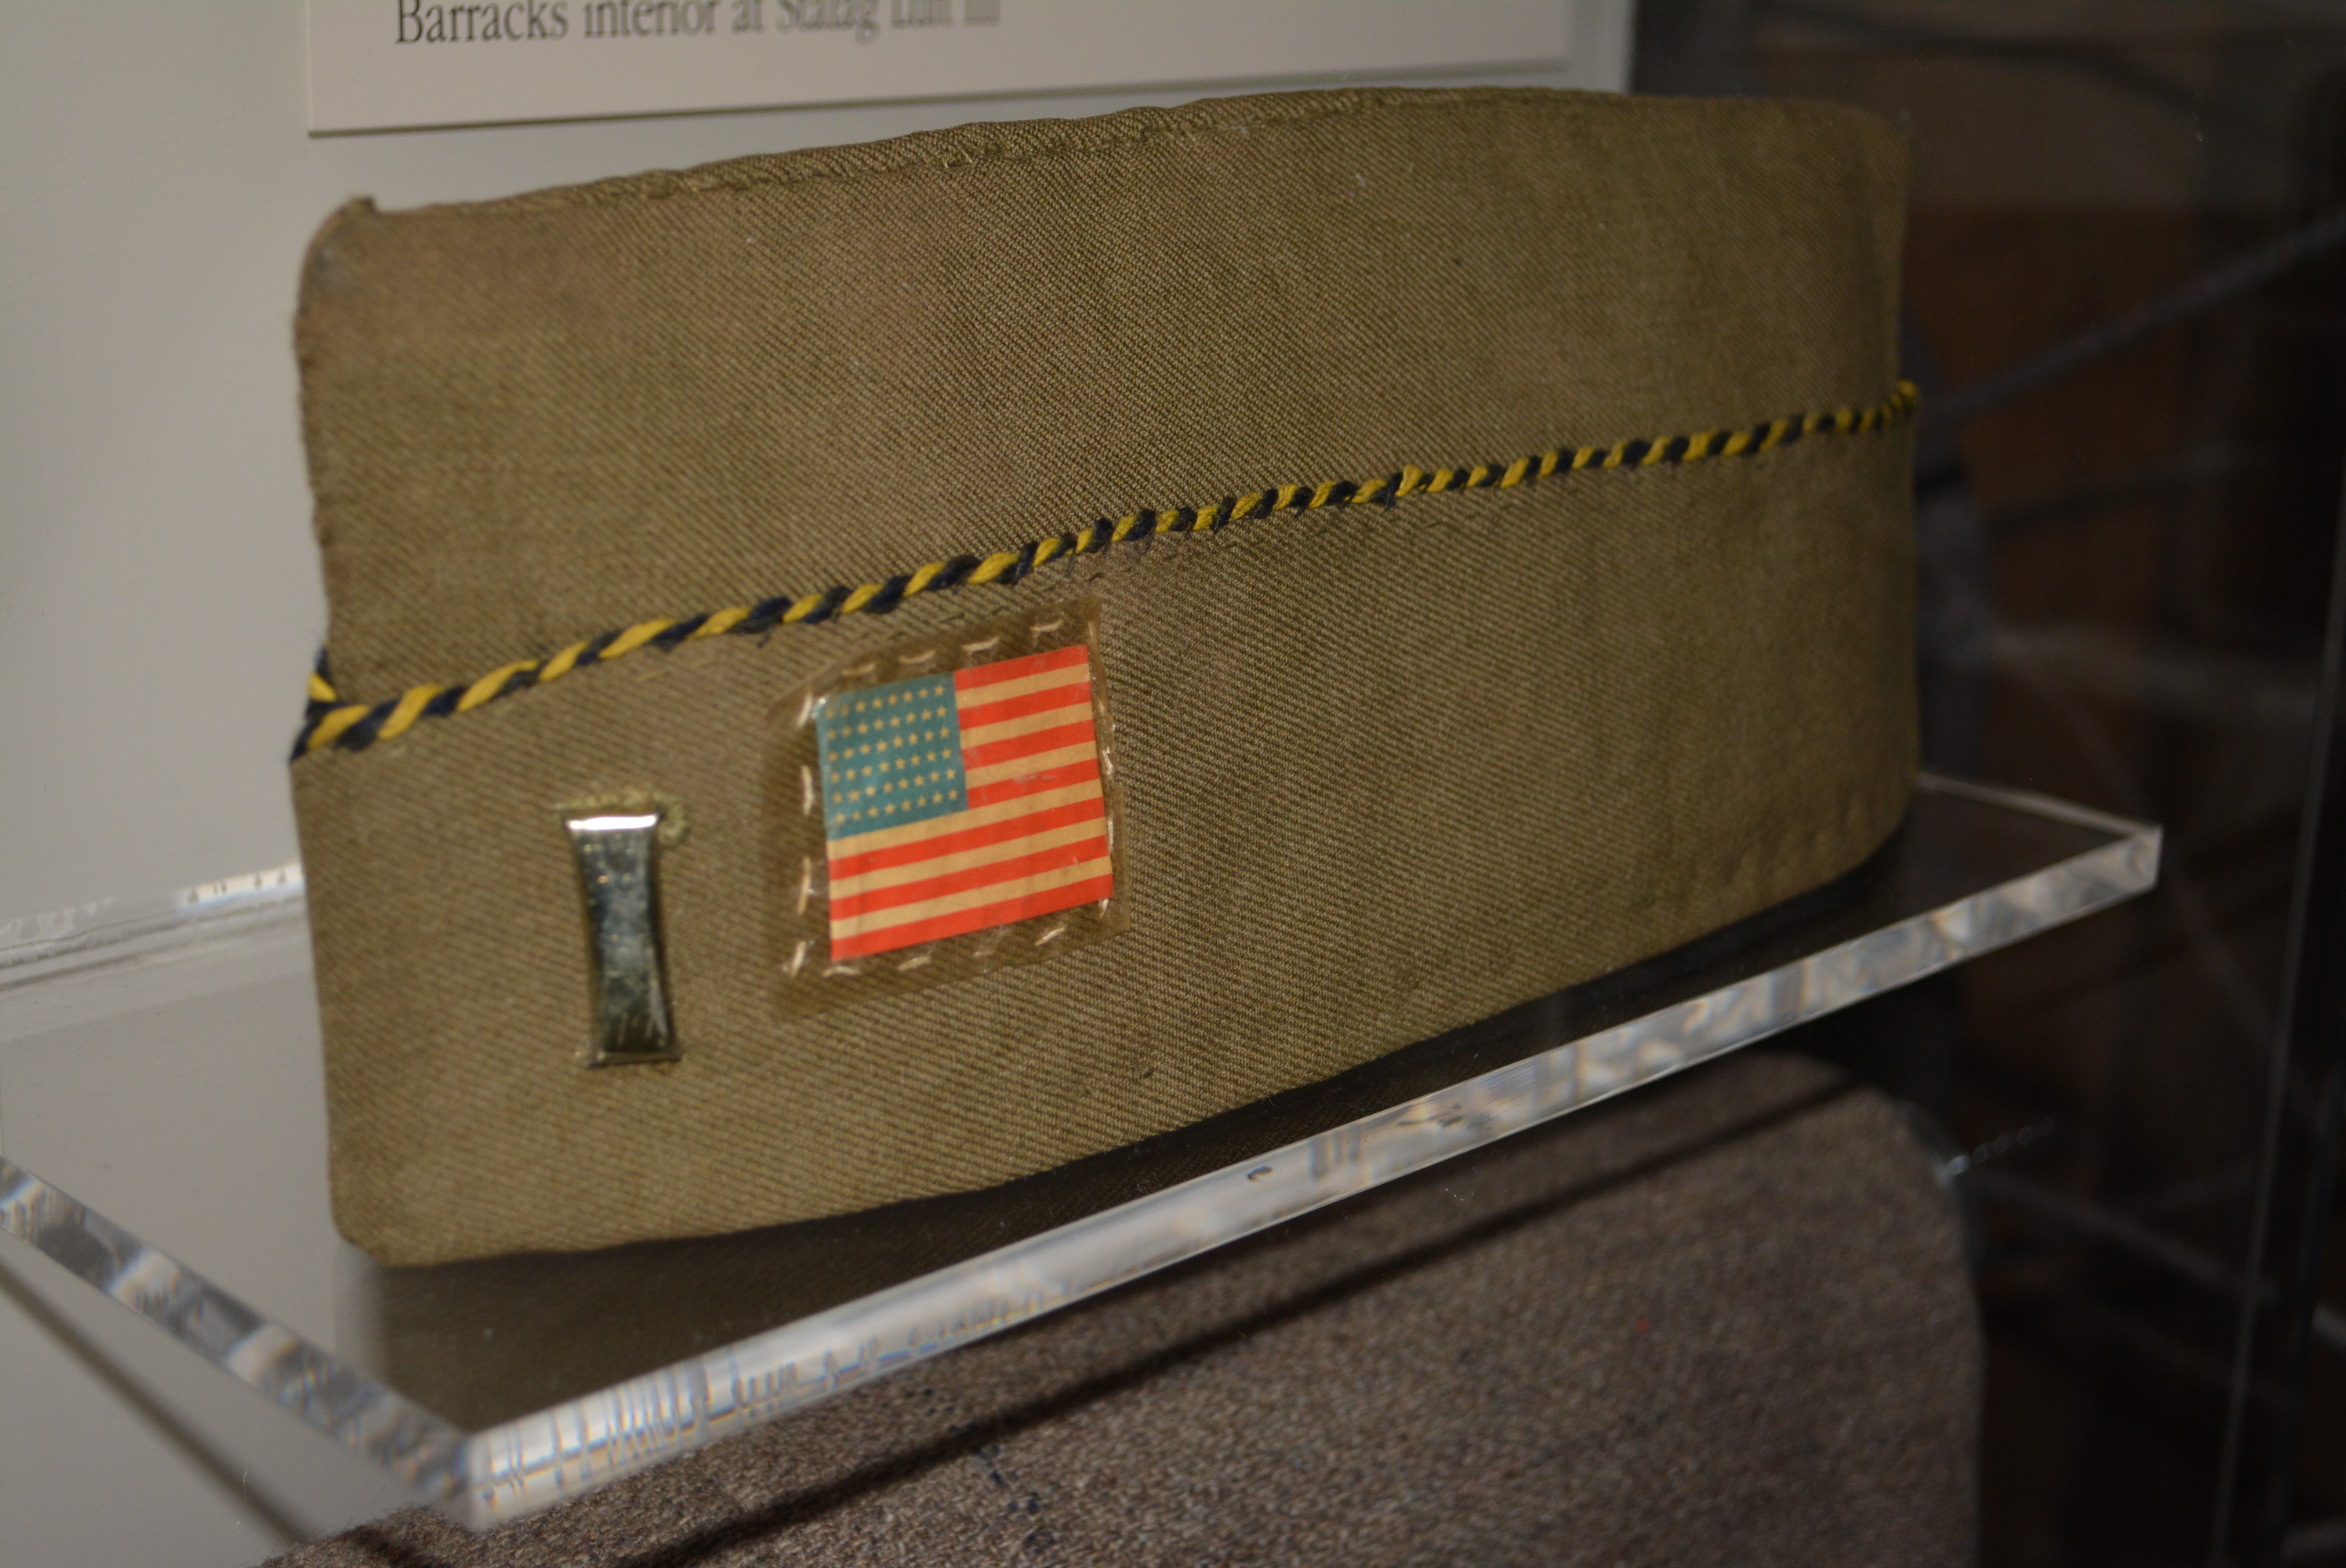 A military garrison cap with a small U.S. flag and silver bar in an exhibit case